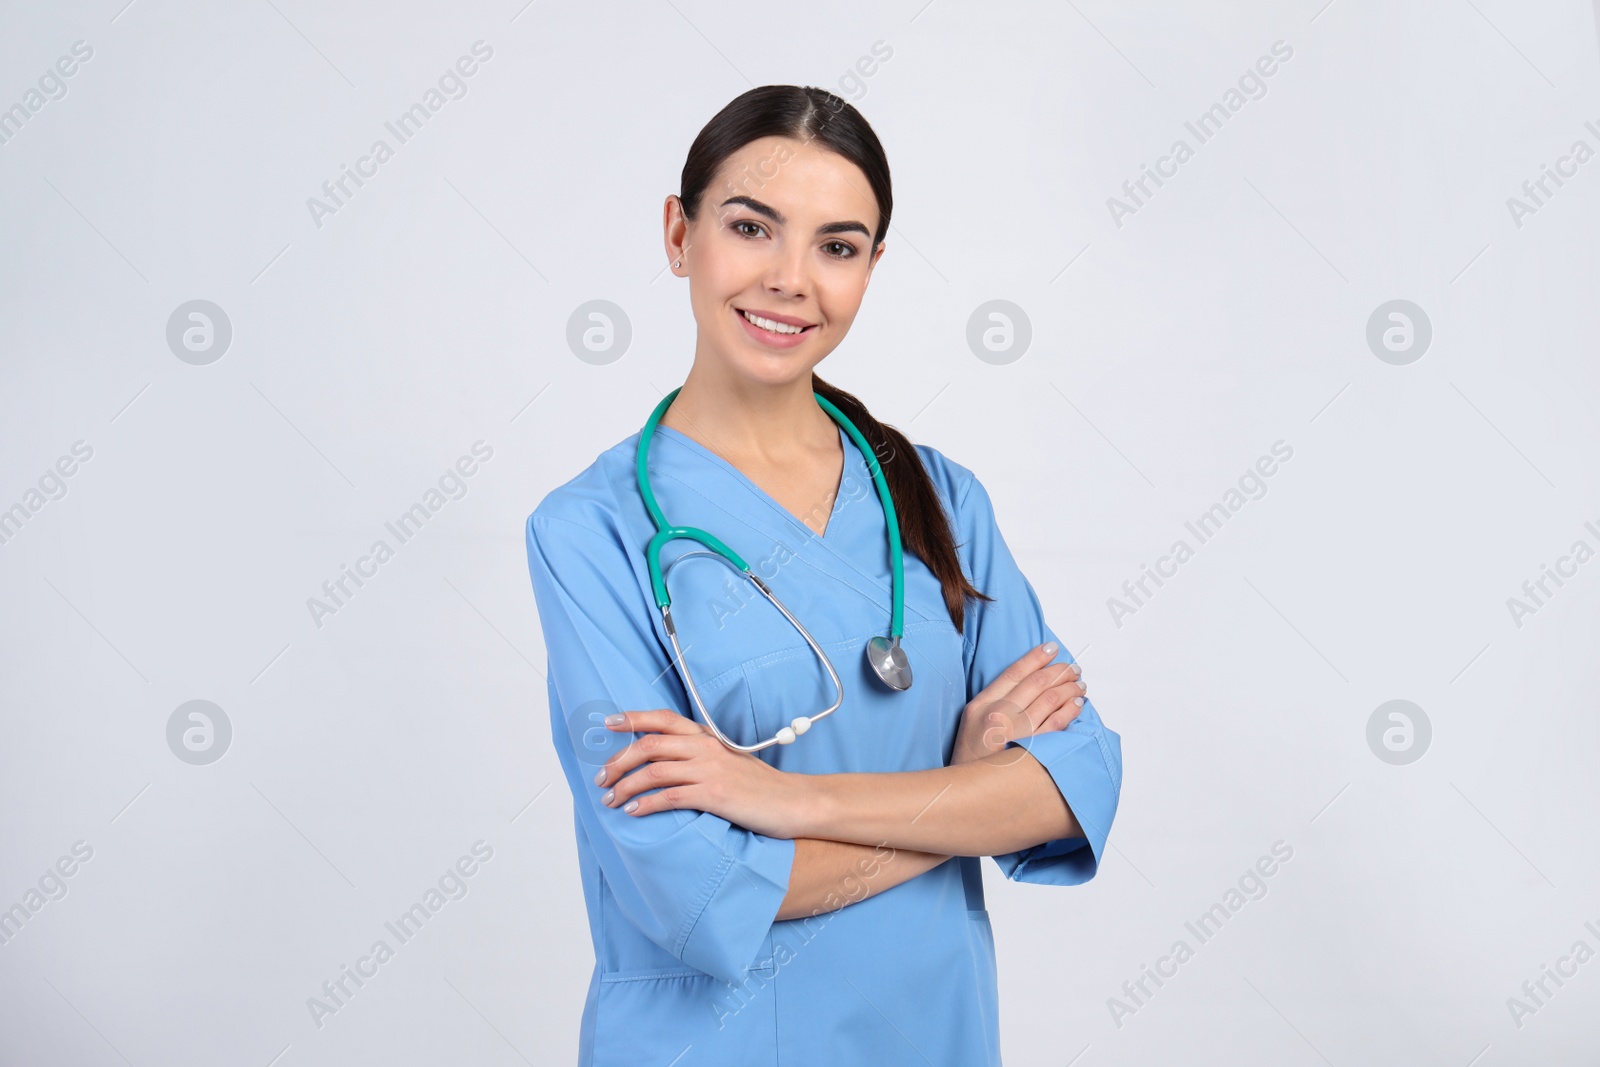 Photo of Portrait of medical assistant with stethoscope on light background